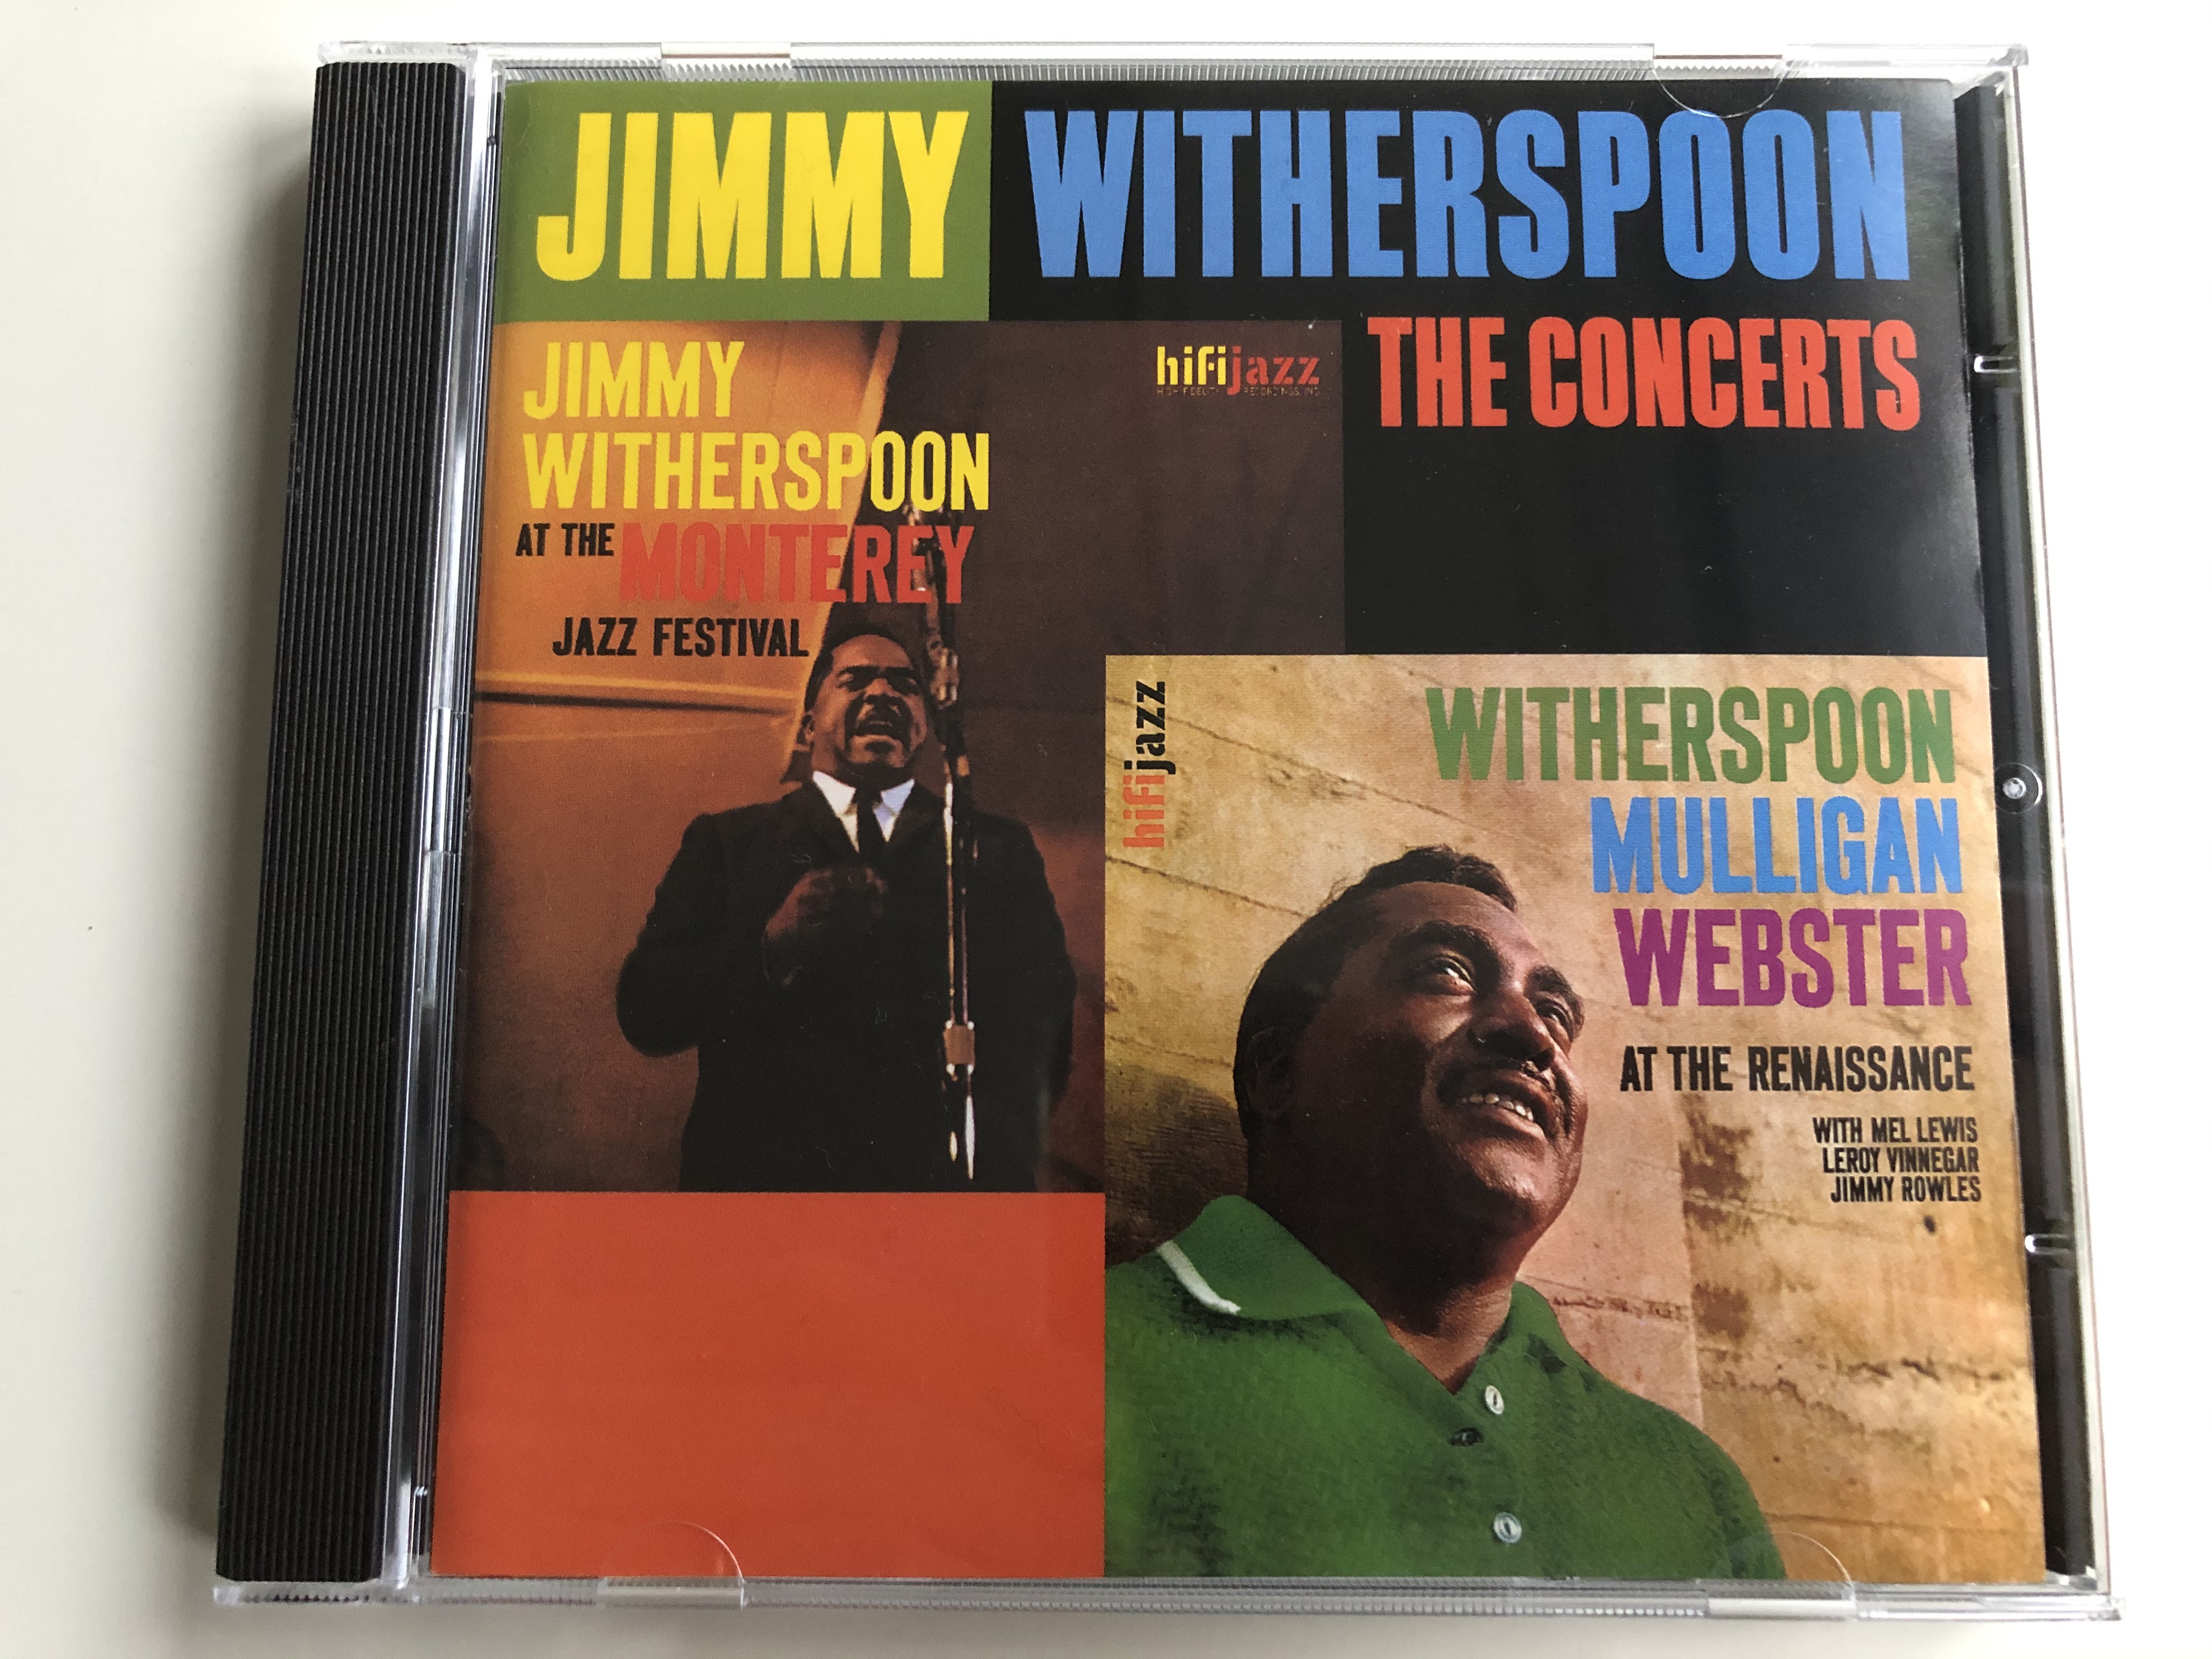 jimmy-witherspoon-the-concerts-jimmy-witherspoon-at-the-monterey-jazz-festival-witherspoon-mulligan-webster-at-the-renaissance-with-mel-lewis-leroy-vinnegar-jimmy-rowles-fantasy-audio-c-1-.jpg